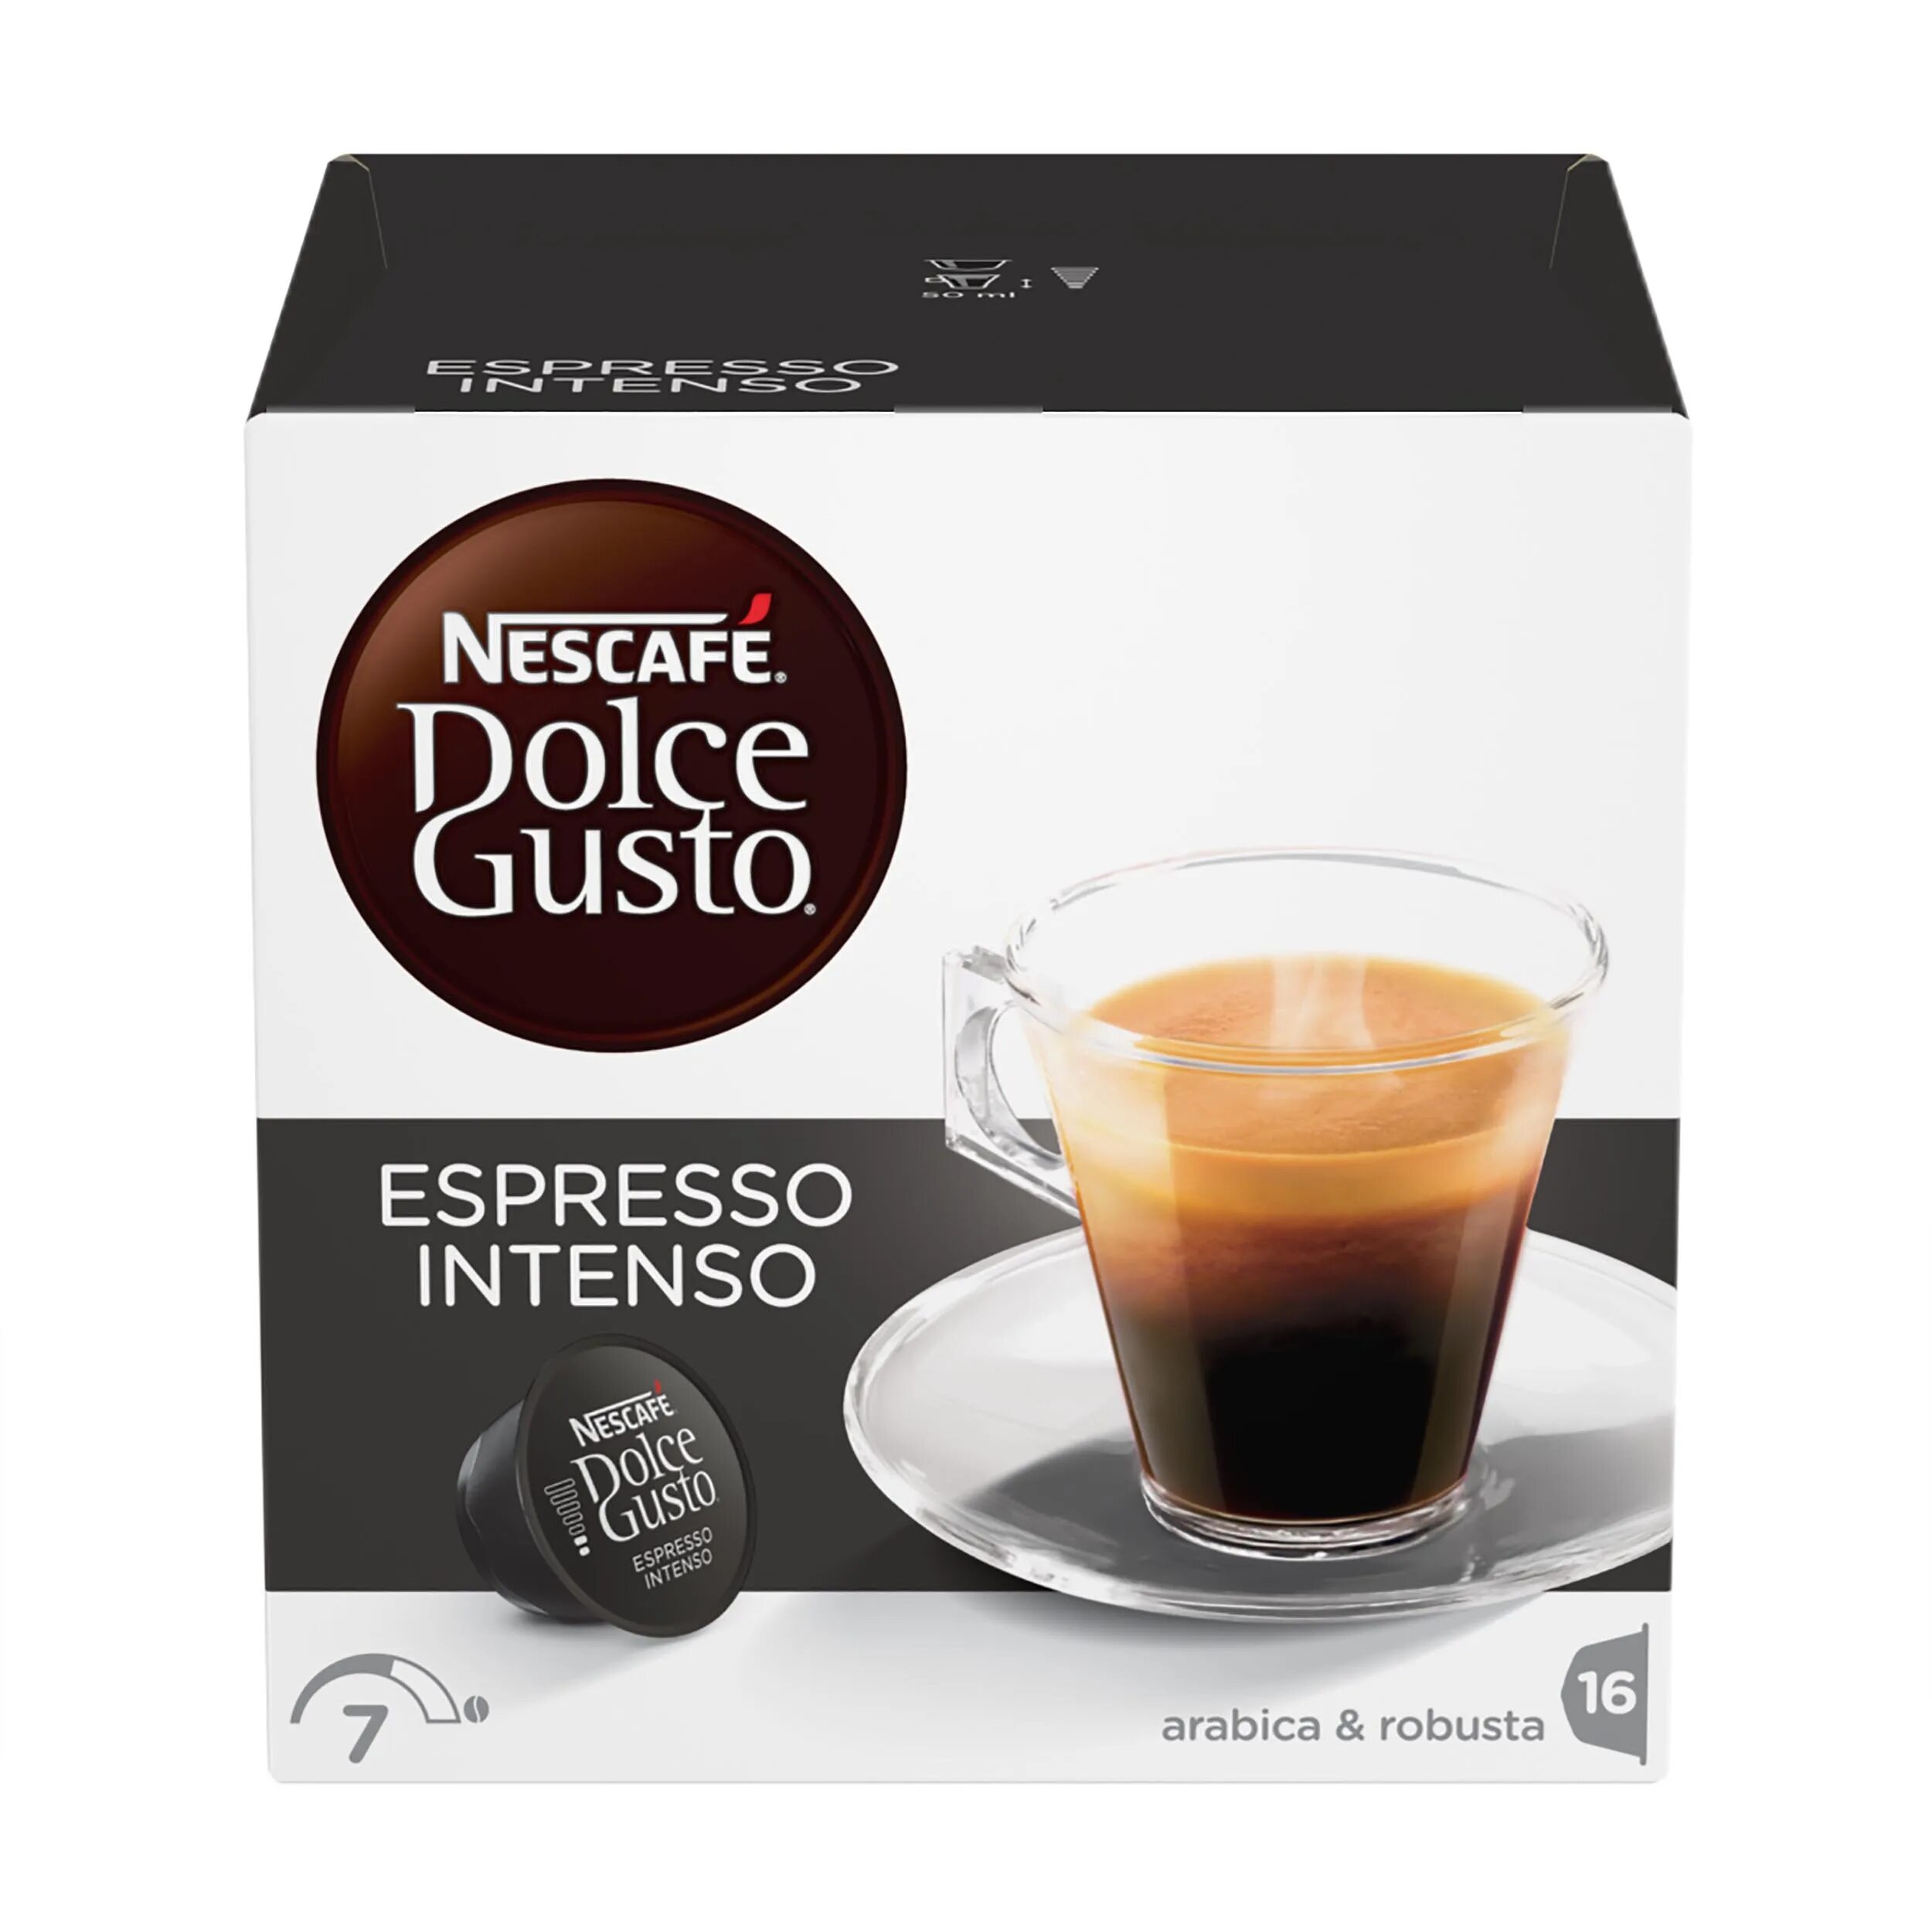 Espresso intenso капсулы Dolce gusto. Dolce gusto капсулы Espresso. Nescafe Dolce gusto капсулы. Офе в капсулах Nescafe Dolce gusto Espress. Espresso dolce